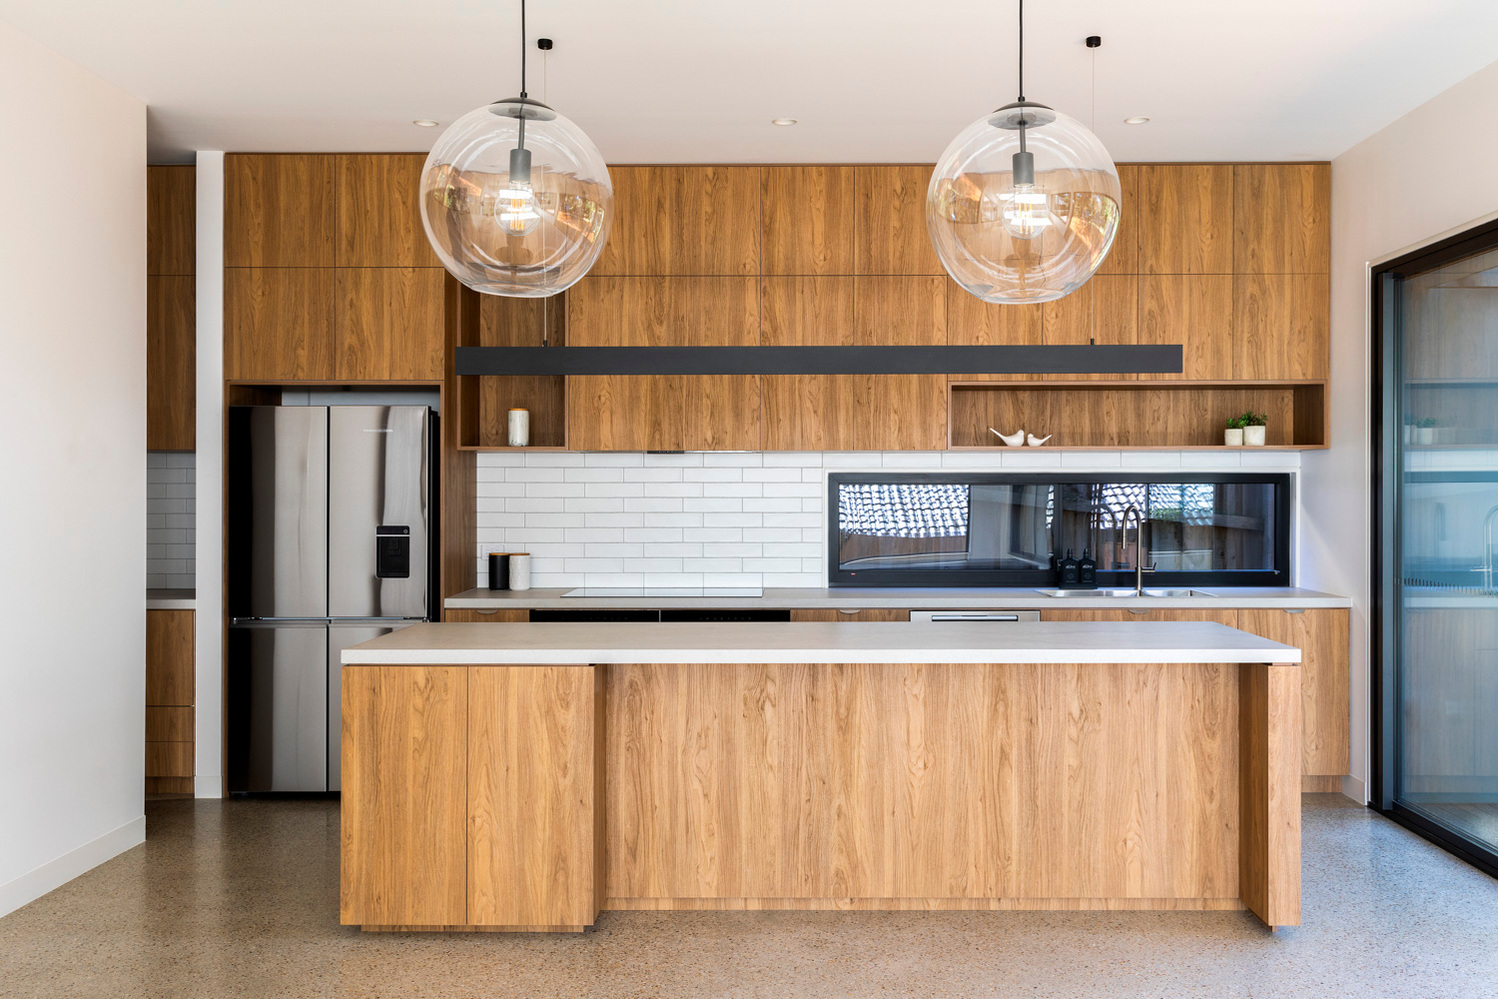 A kitchen with natural finishes of timber veneer, polished concrete and subway tiles feature in this all electric 7 star rated house.